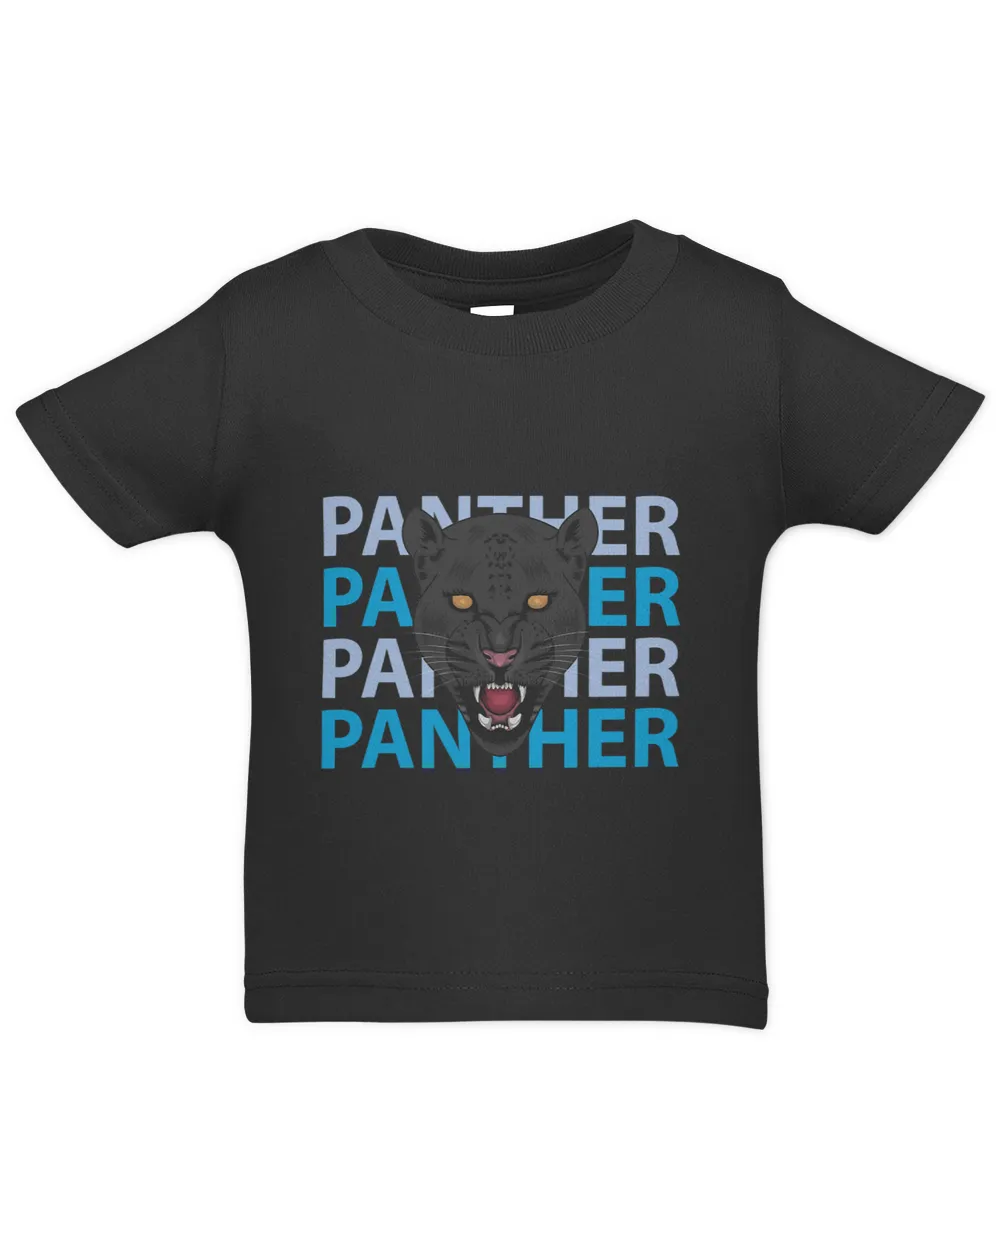 Grey Panther Design Motivation Graphic Outwear Design Tees